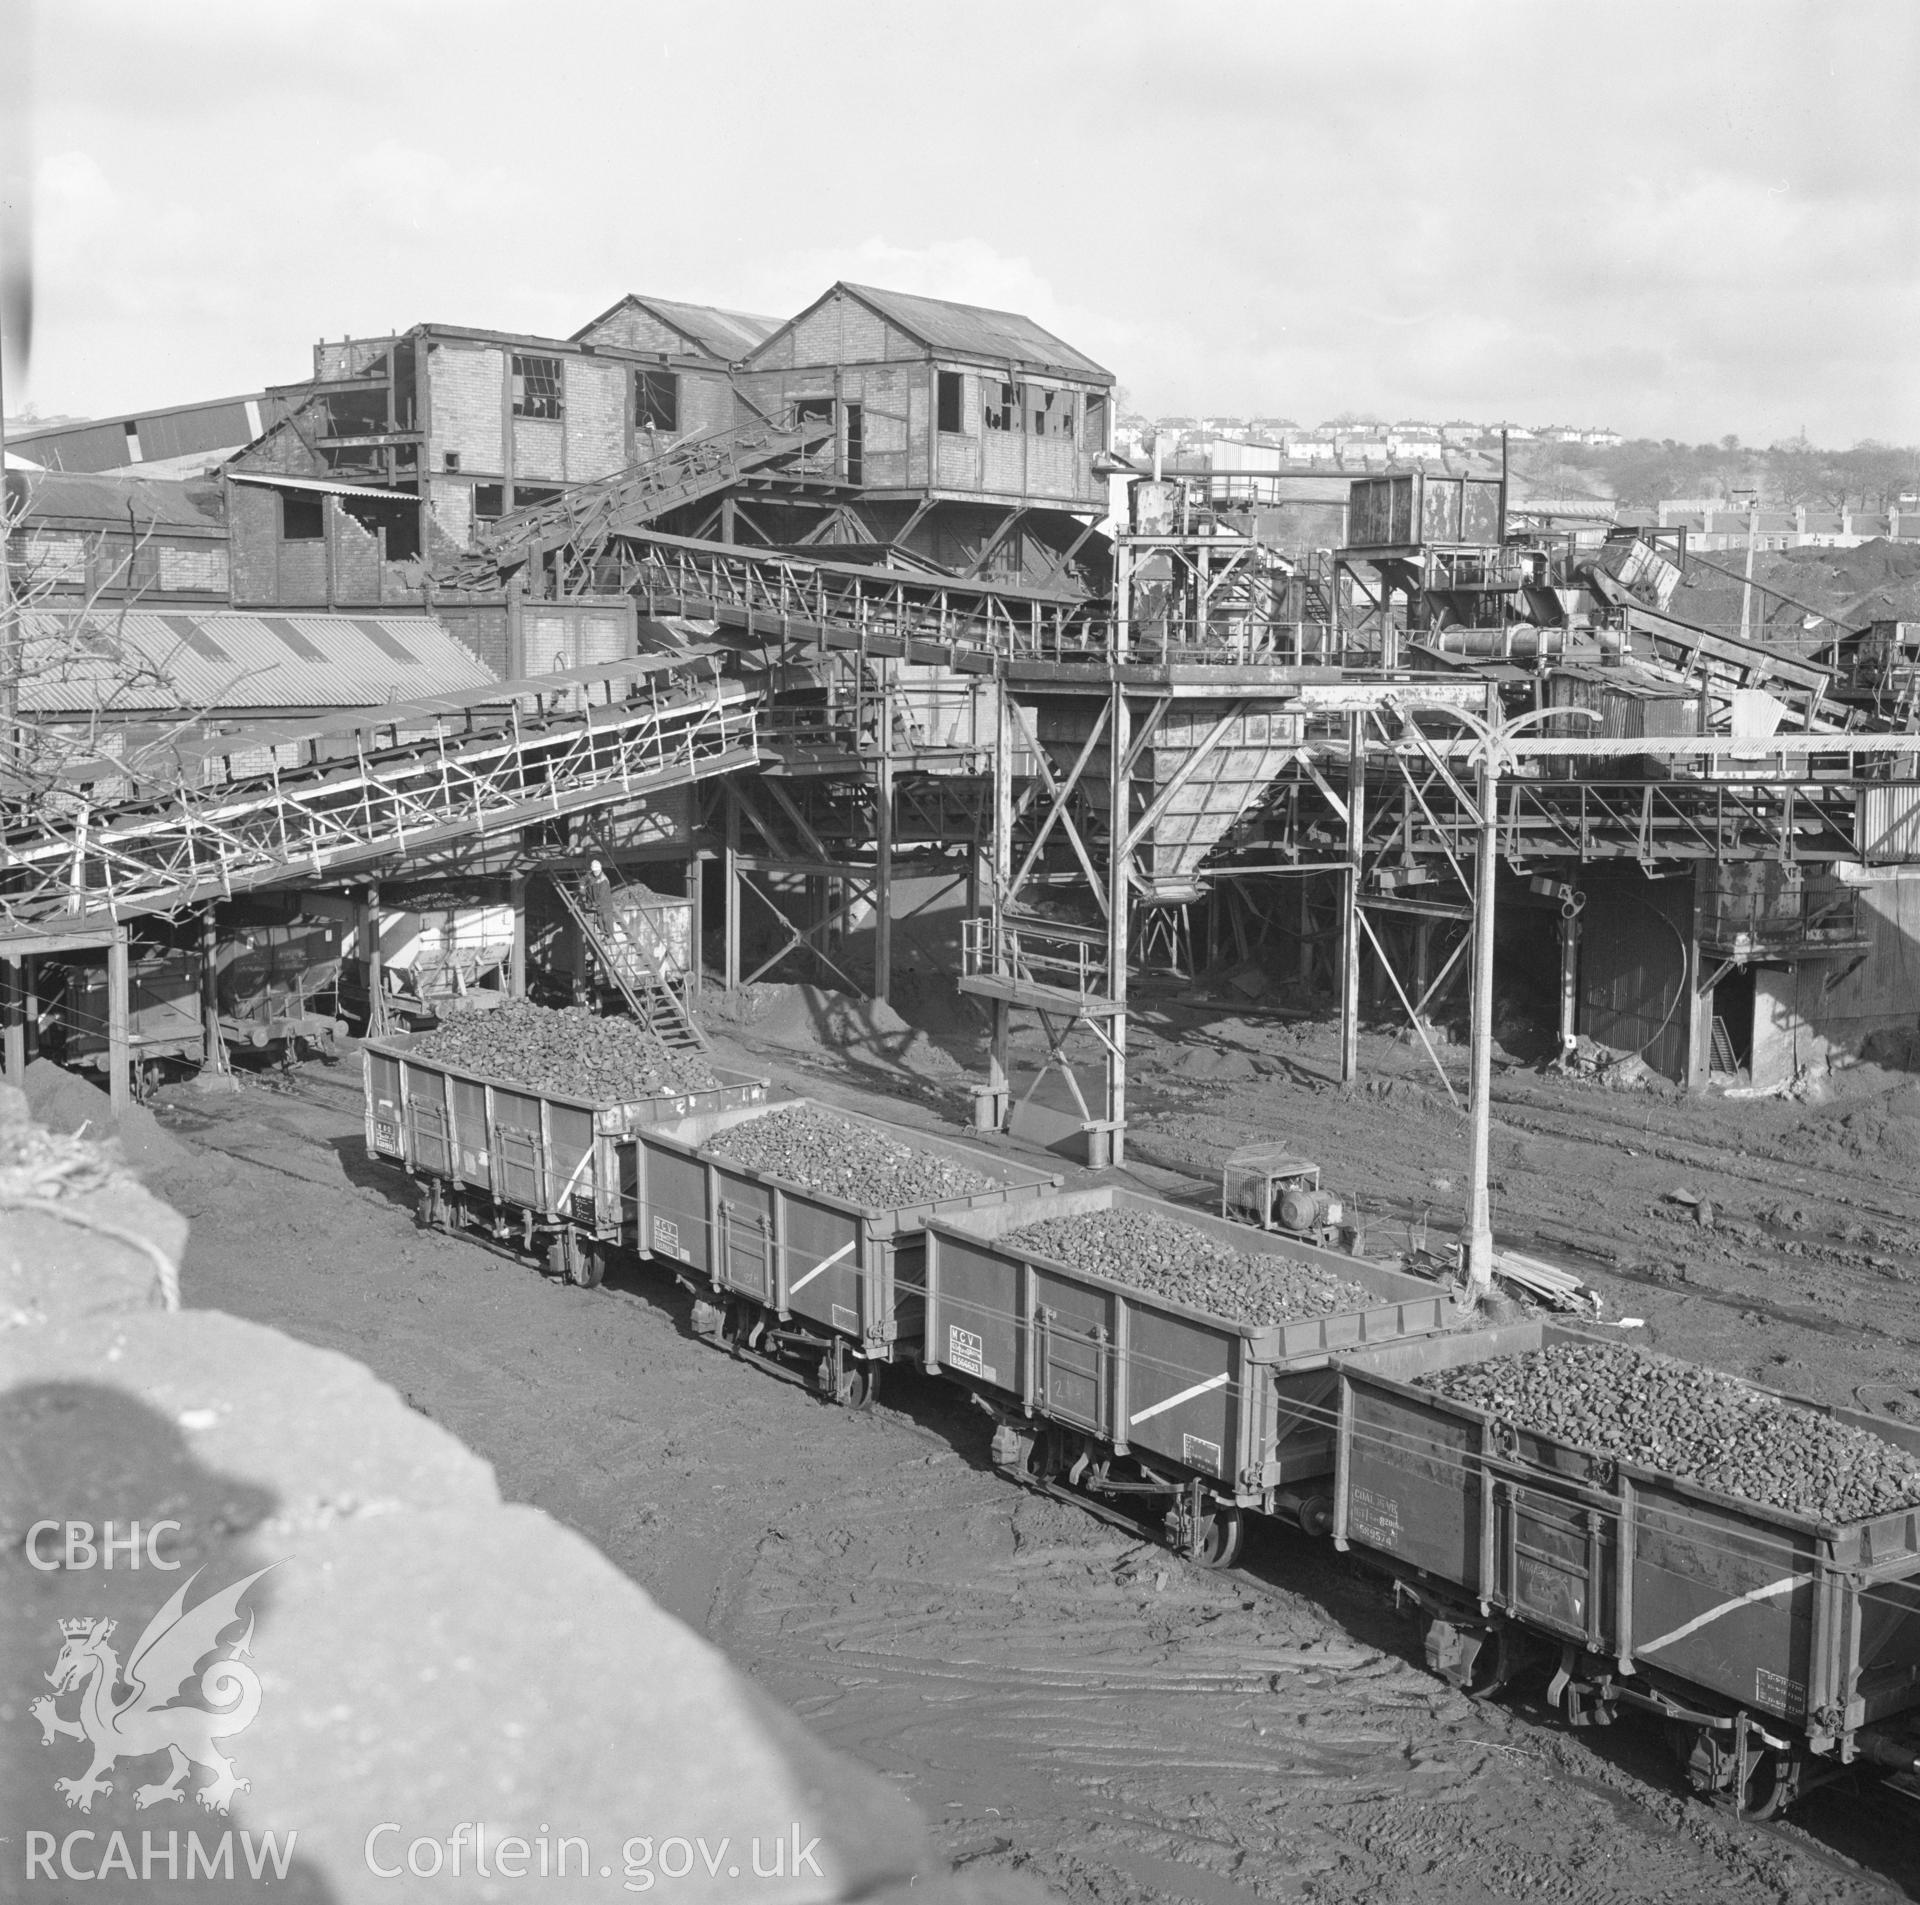 Digital copy of an acetate negative showing screens and railway sidings, before modernisation of Ocean Deep Navigation Colliery from the John Cornwell Collection.